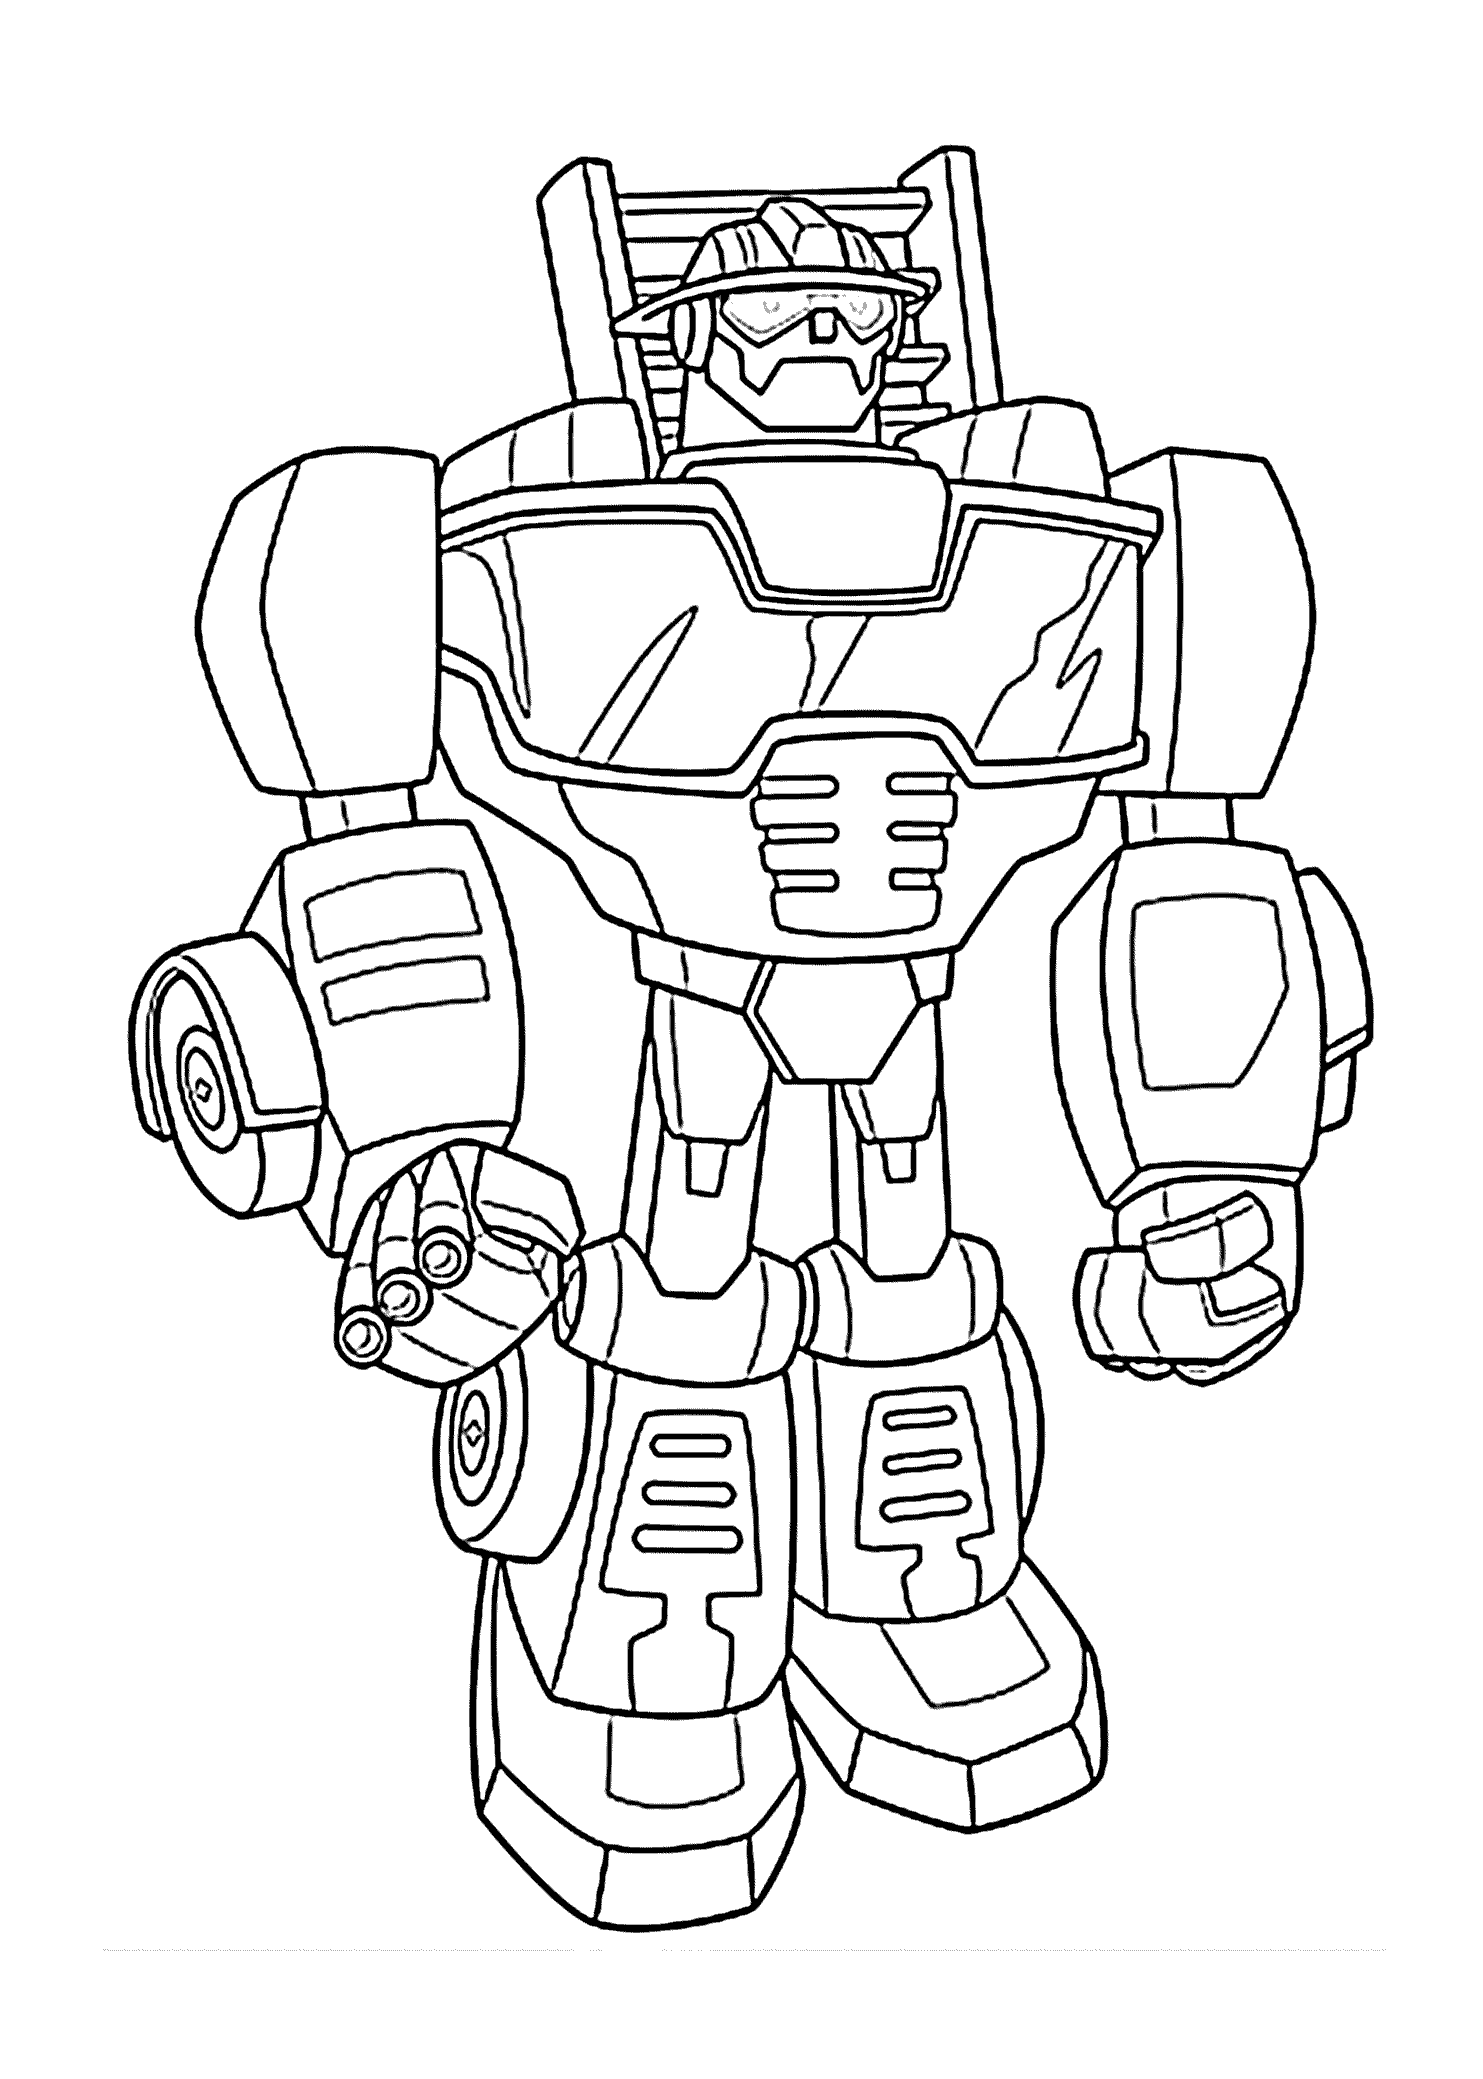 Heatwave bot coloring pages for kids, printable free - Rescue bots |  Transformers coloring pages, Rescue bots birthday party, Transformers rescue  bots birthday